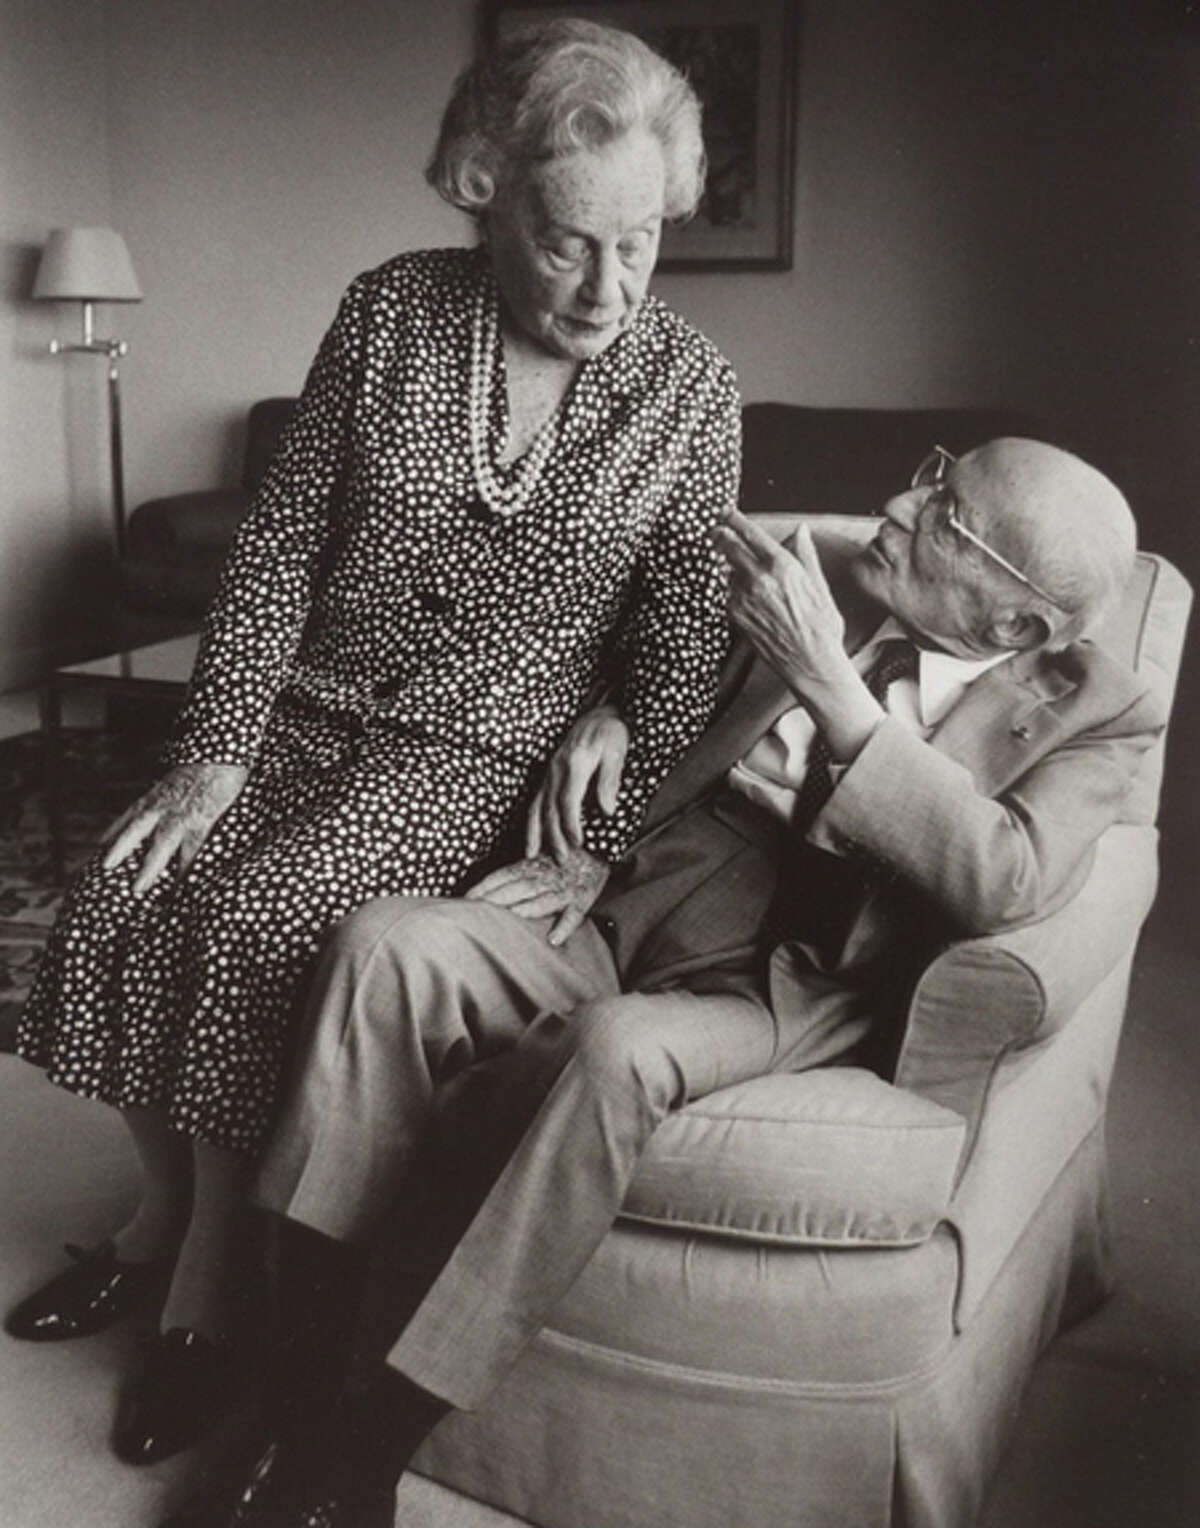 Industrialists and philanthropists Henry J. and Erna D. Leir are the founders of the Leir Foundation, which supports the advancement of high-quality educational and cultural institutions and, among other things, services for children and the disadvantaged, and programs that enhance multicultural understanding and diversity.